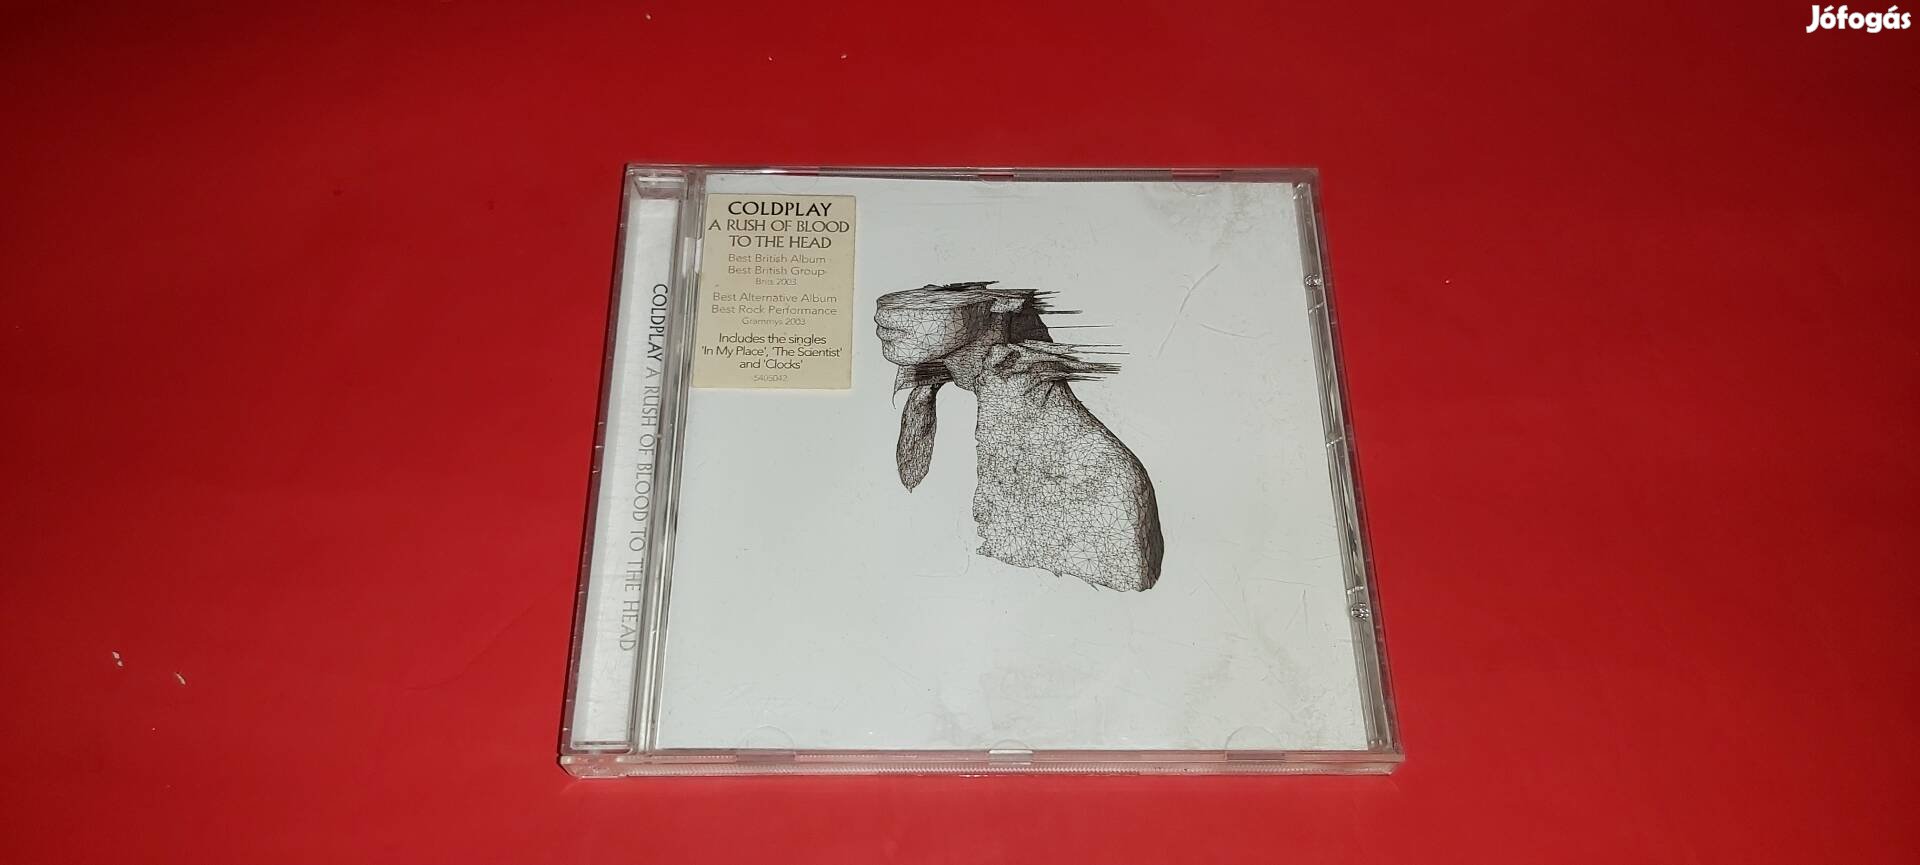 Coldplay A rush of blood to the head Cd 2002